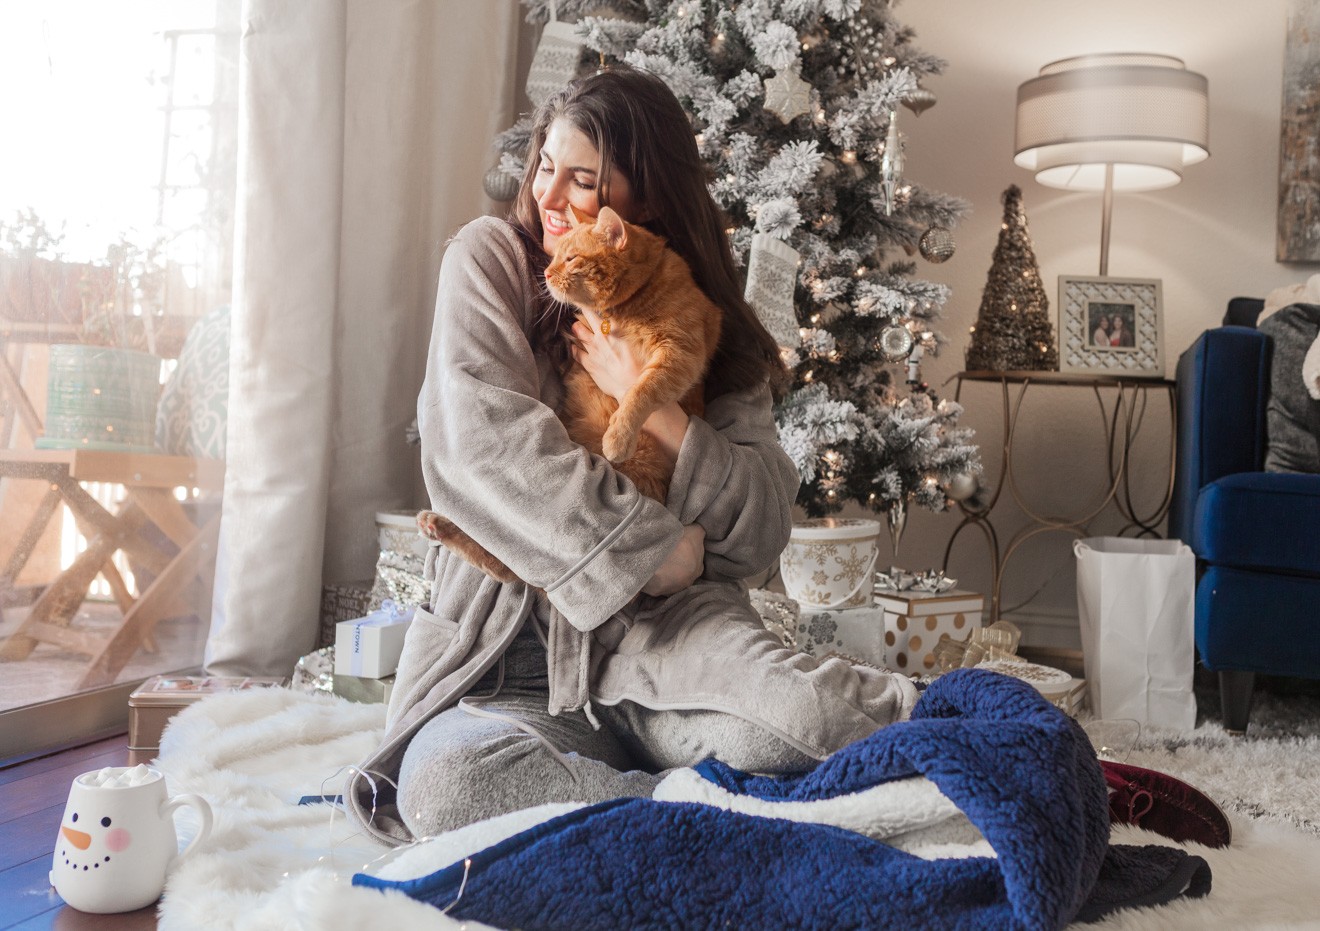 Christmas | Presents | Dyson | Cheese Board | Amazon Echo | Slippers | The Best Bed Bath & Beyond Gifts for Her, Him and Home featured by top Los Angeles life and style blogger Laura Lily